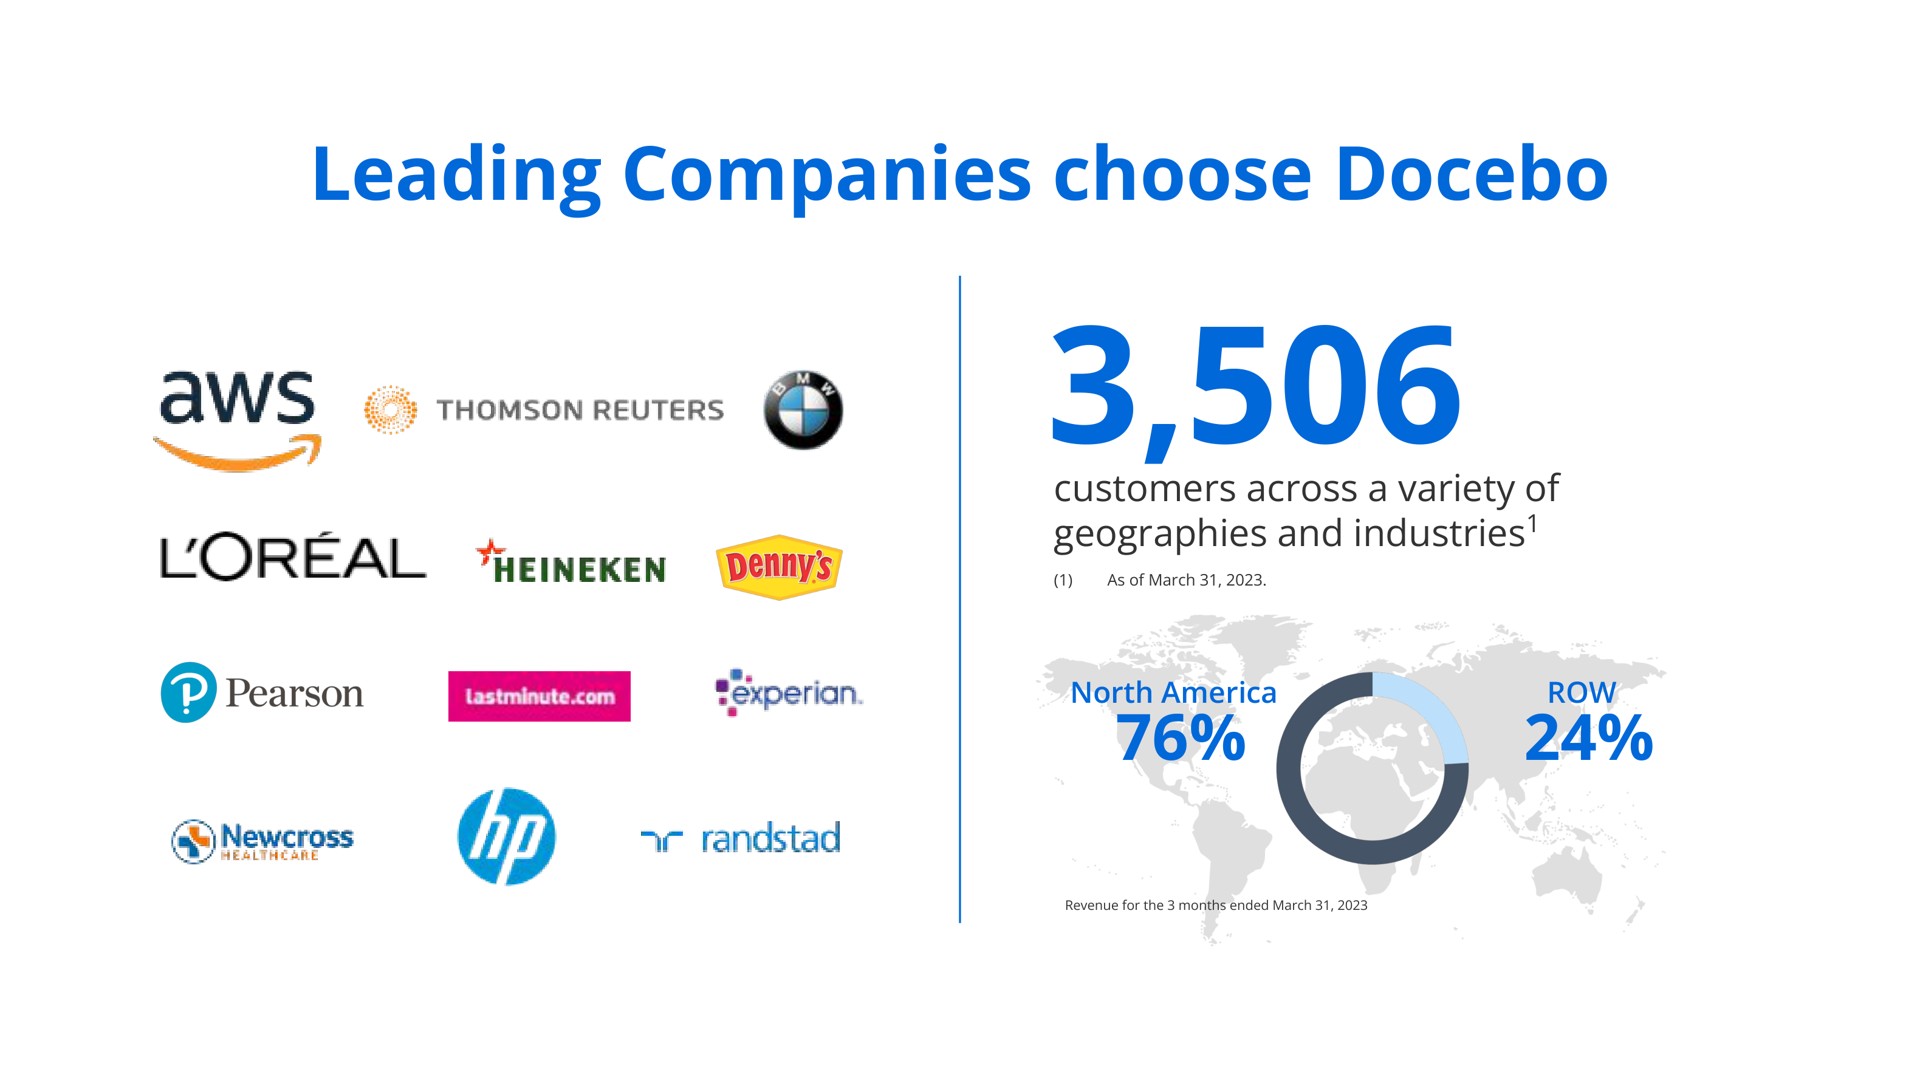 leading companies choose customers across a variety of geographies and industries eer north row | Docebo